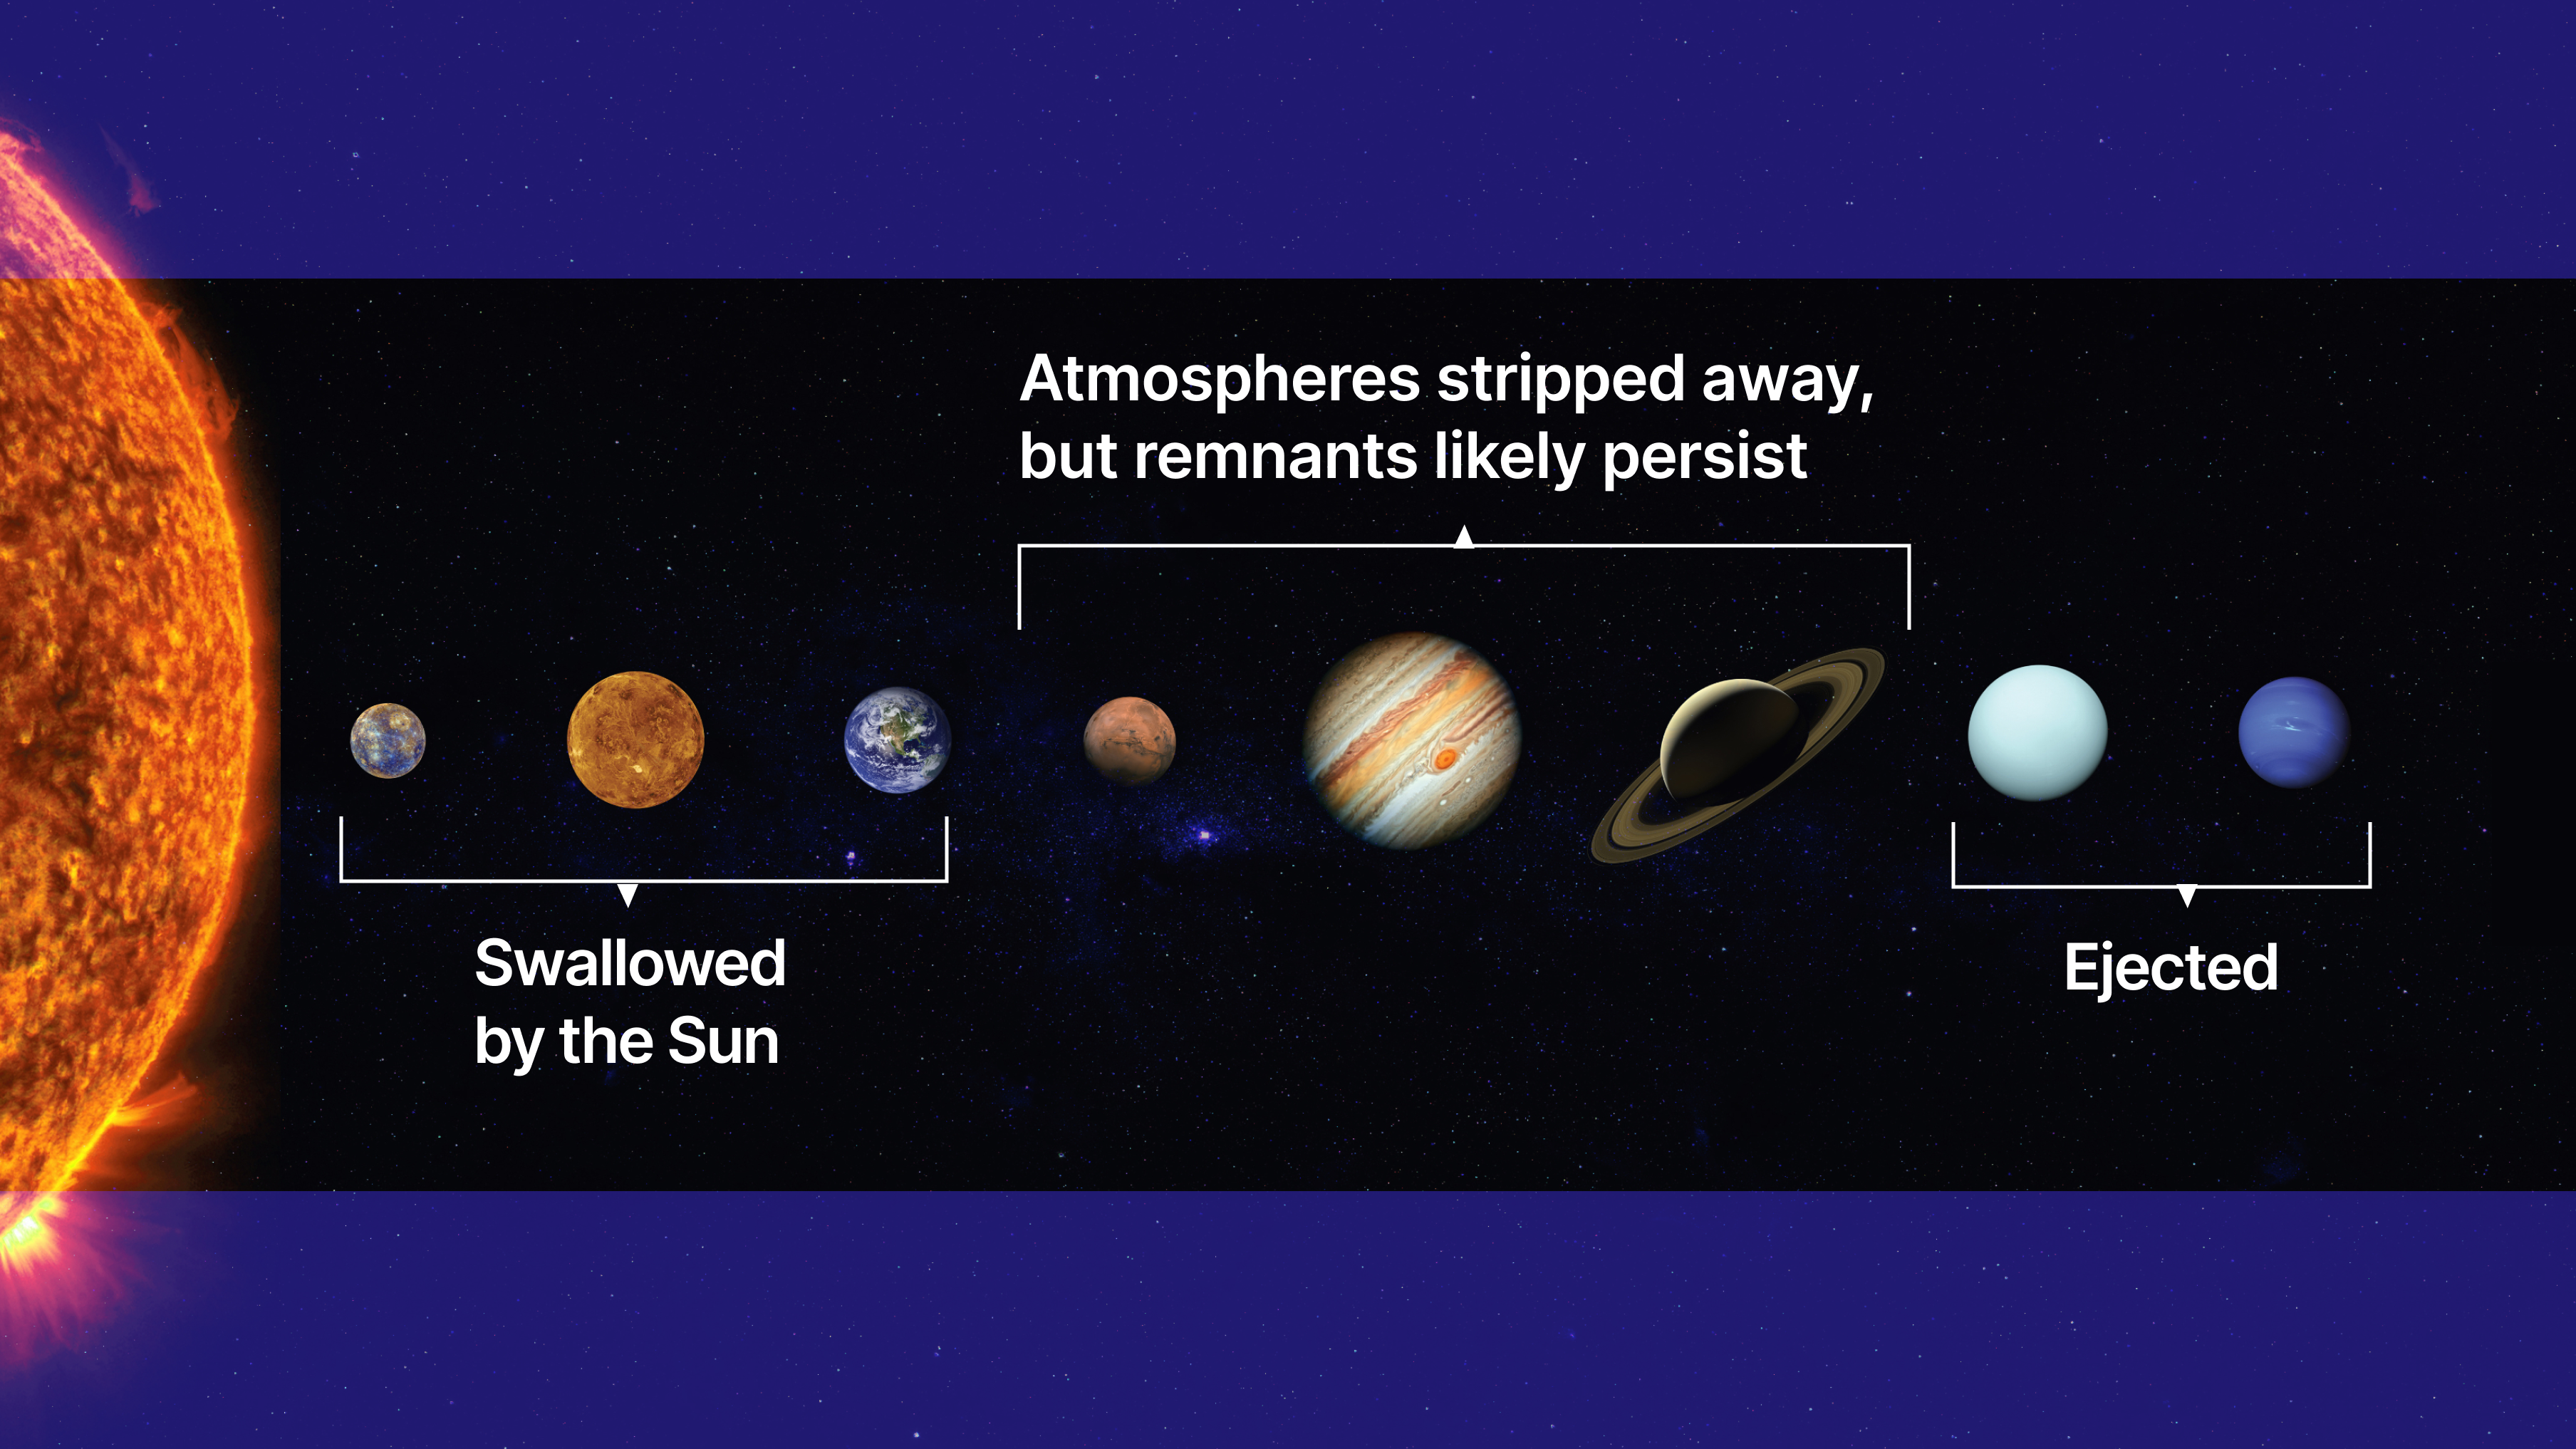 Illustration of the solar system's planets and their predicted fates, with some being swallowed by the sun as it dies and others stripped of their atmospheres or ejected.